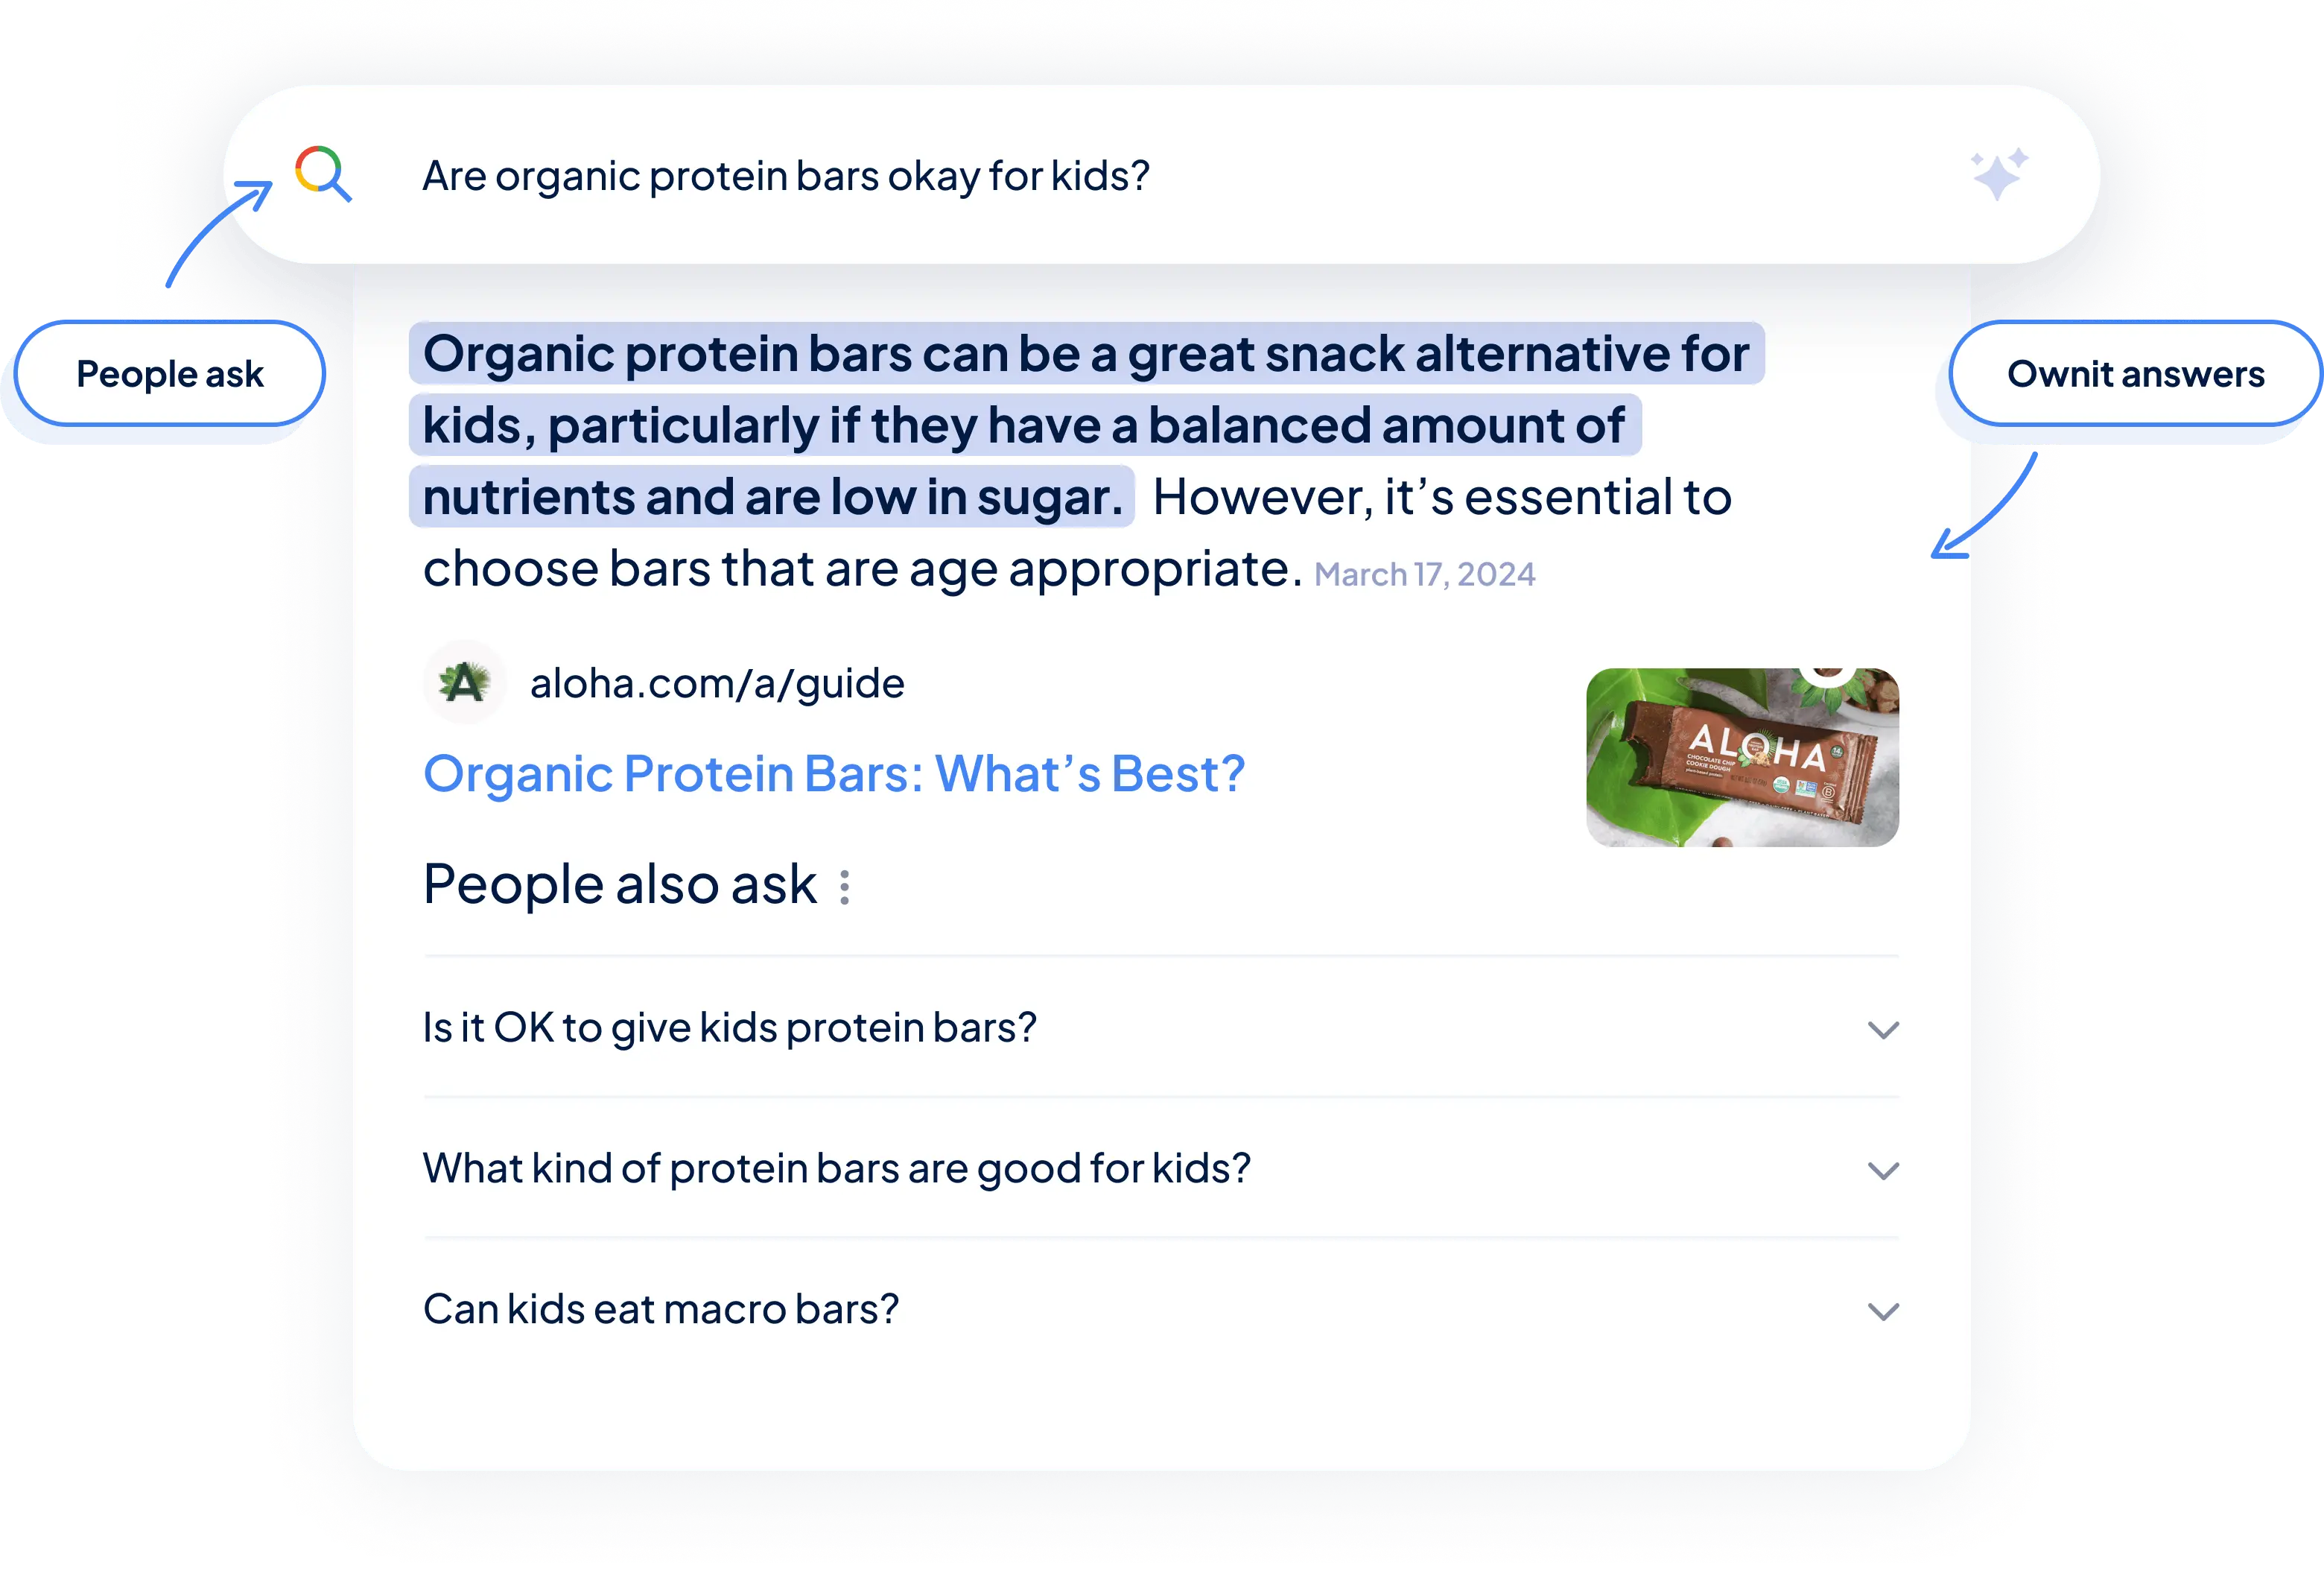 a screenshot of a google search result asking if organic protein bars are okay for kids